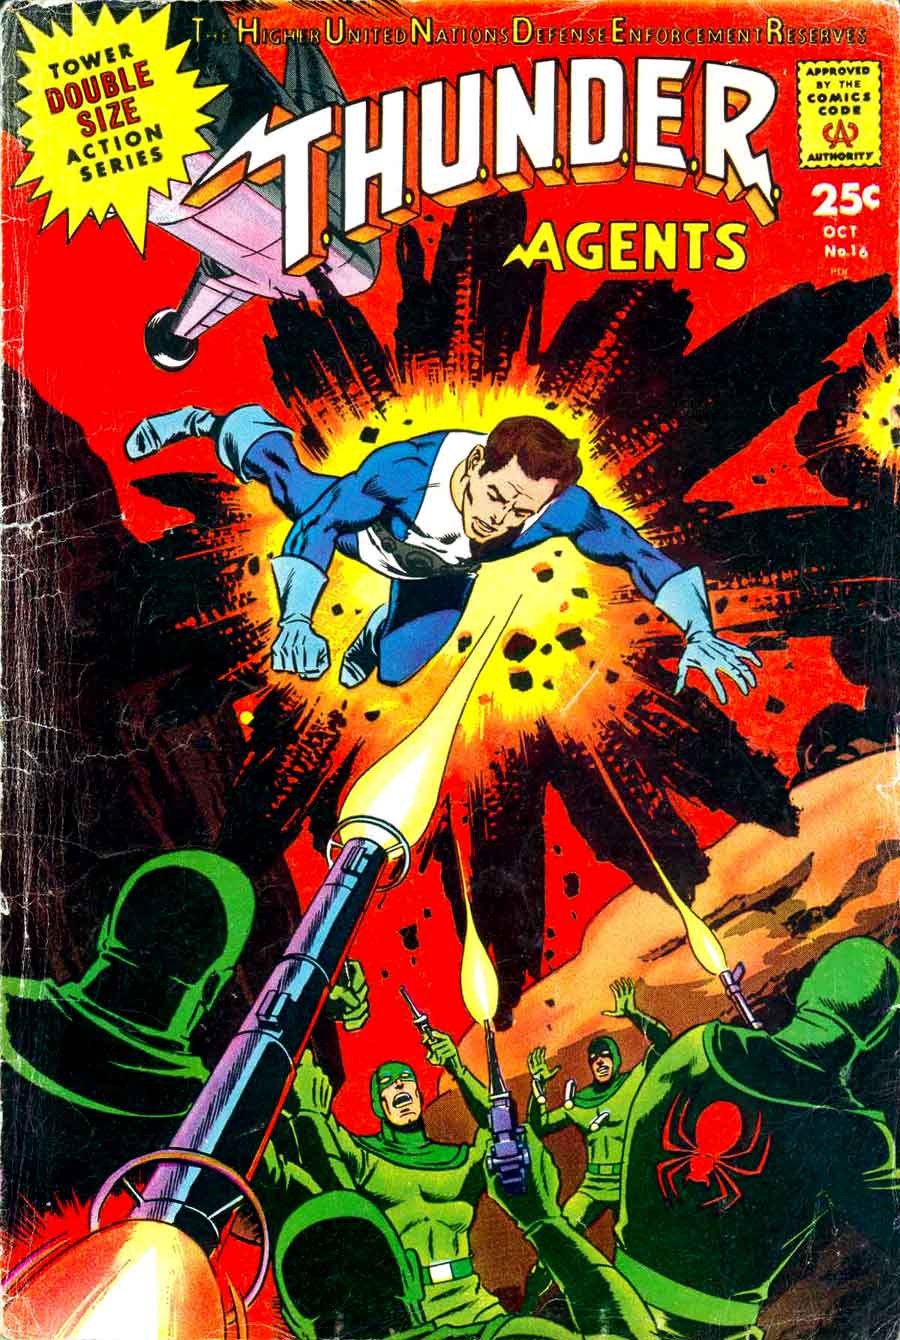 Thunder Agents v1 #16 tower silver age 1960s comic book cover art by Wally Wood